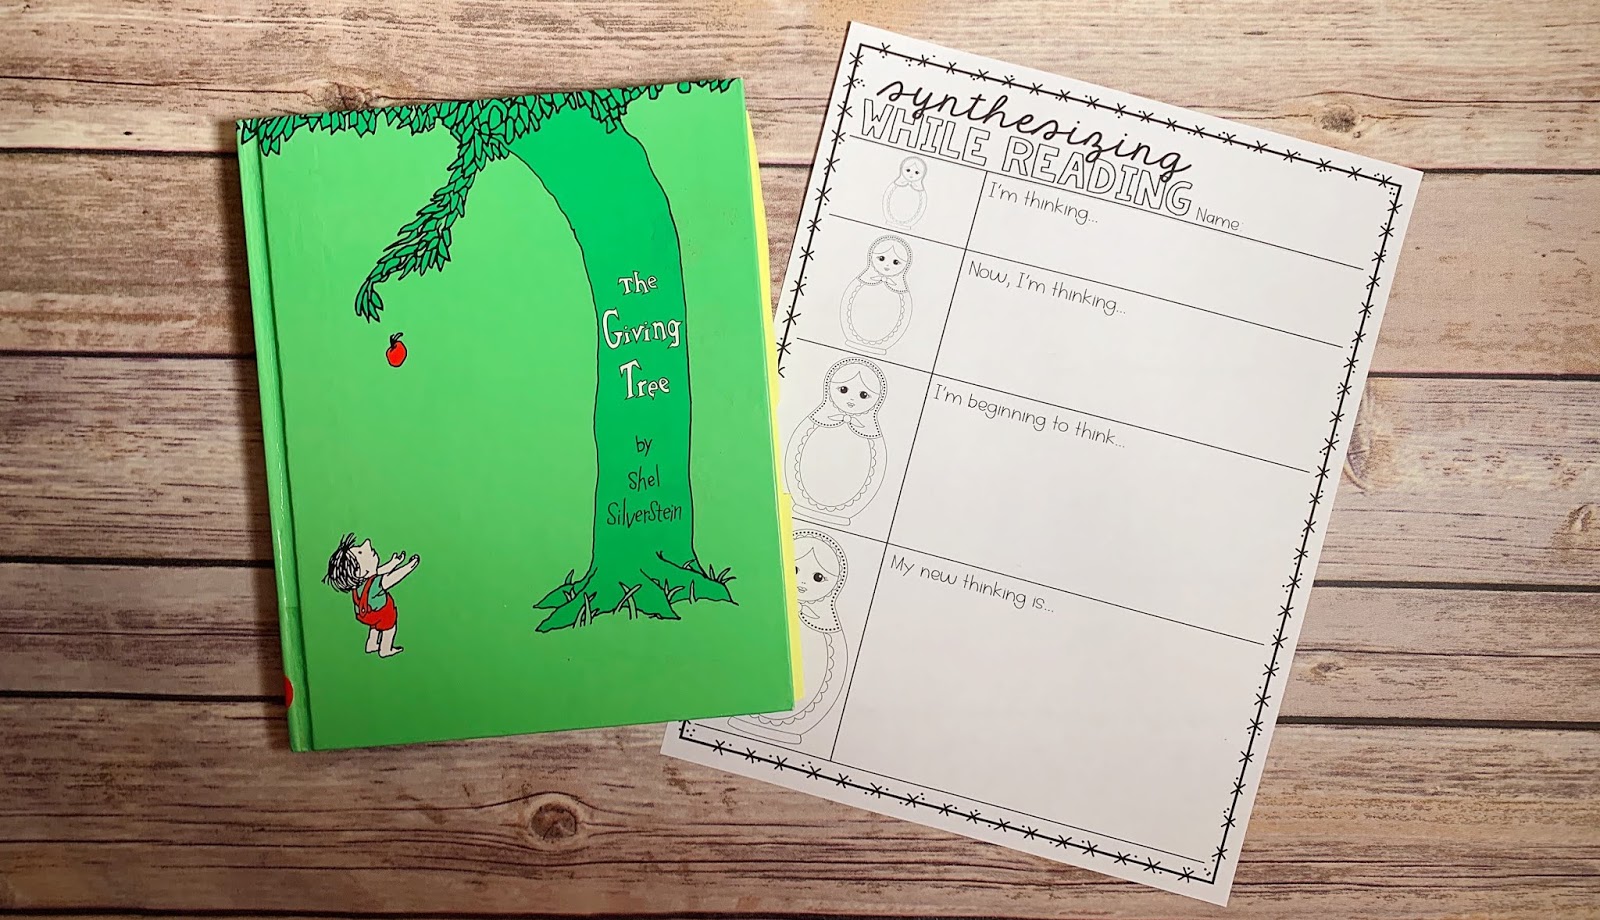 Mentor Text with text "The Giving Tree" and Graphic Organizer with text "Synthesizing While Reading"